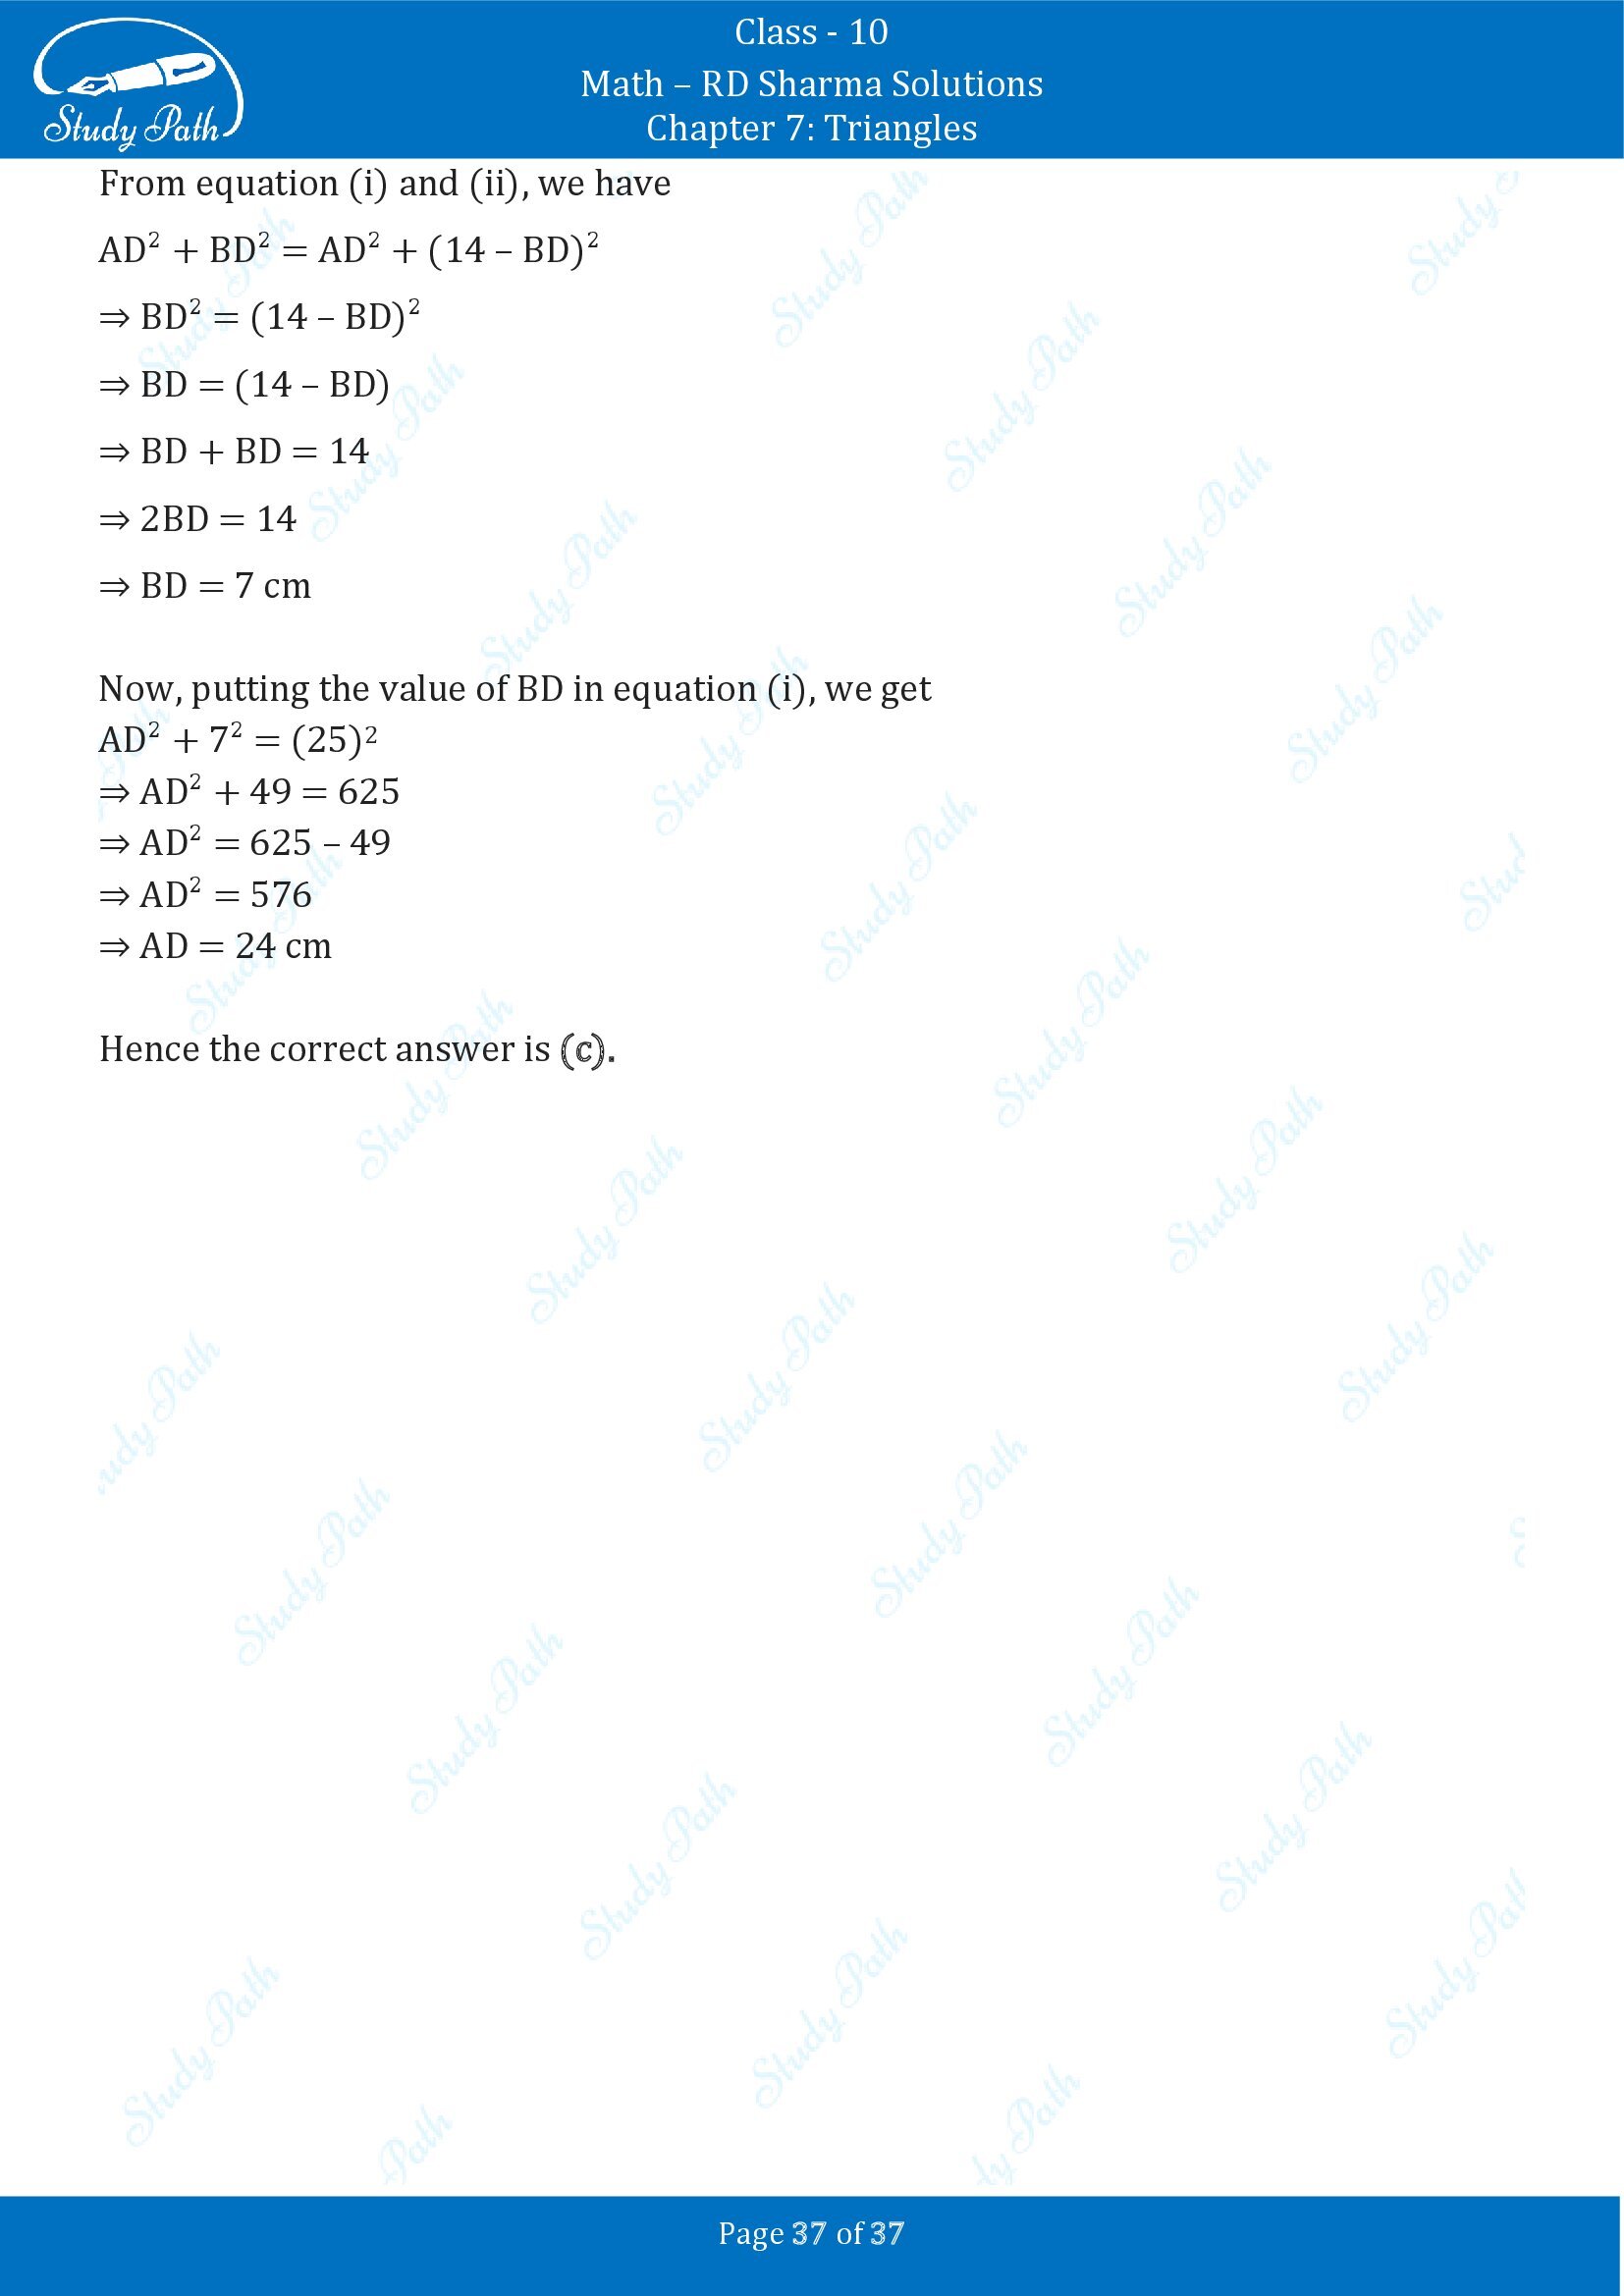 RD Sharma Solutions Class 10 Chapter 7 Triangles Multiple Choice Question MCQs 00037